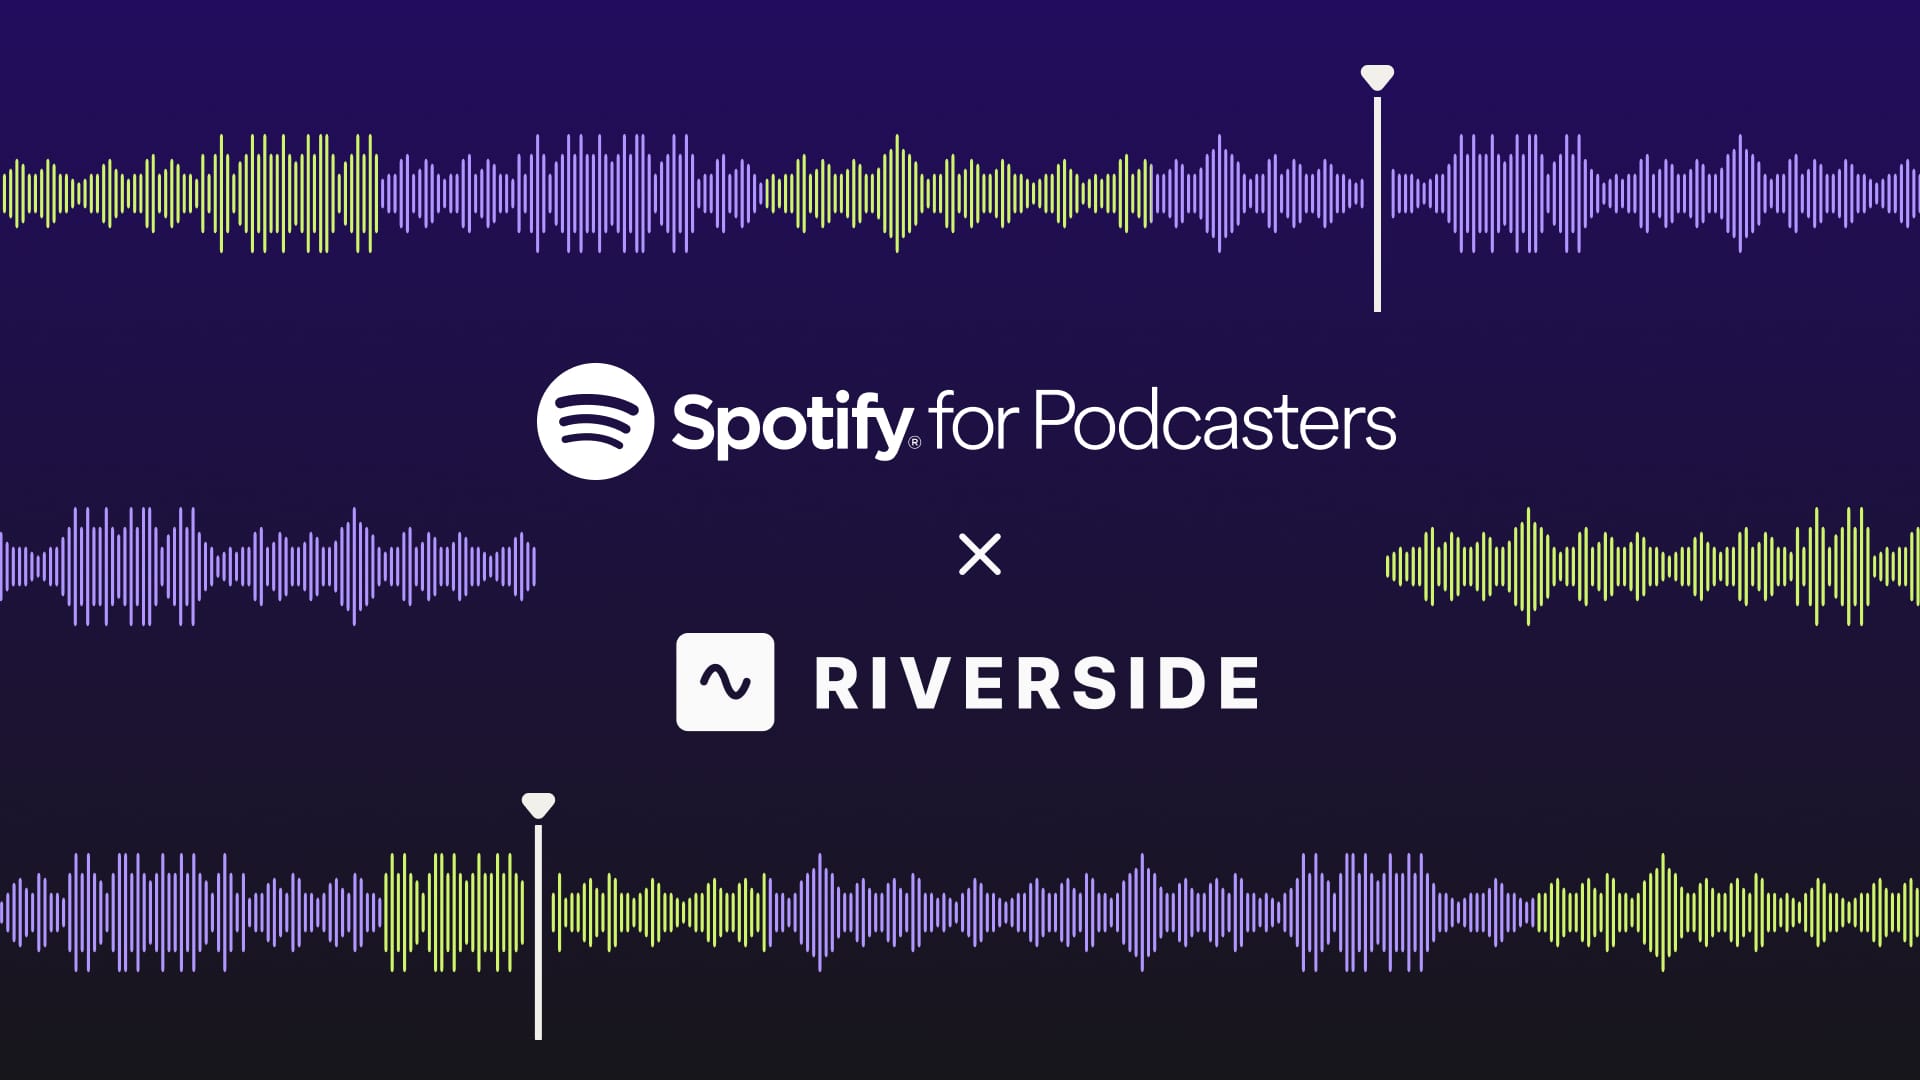 Creators can no longer add music to Spotify podcasts